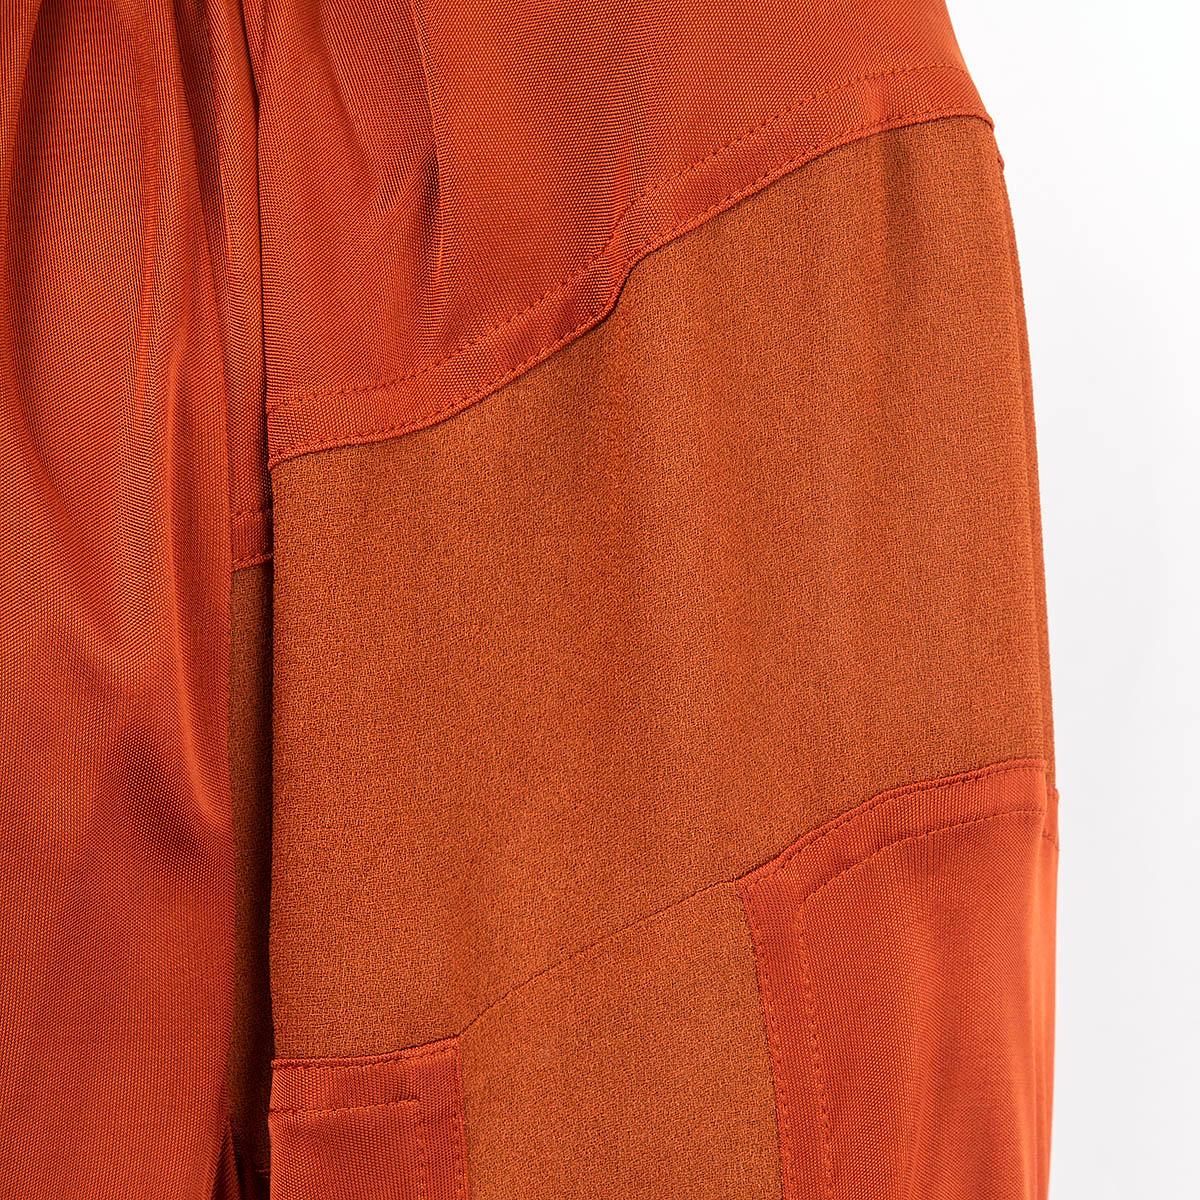 CHLOE copper silk CREPE PANELED SATIN JERSEY Blouse Shirt 38 S For Sale 2